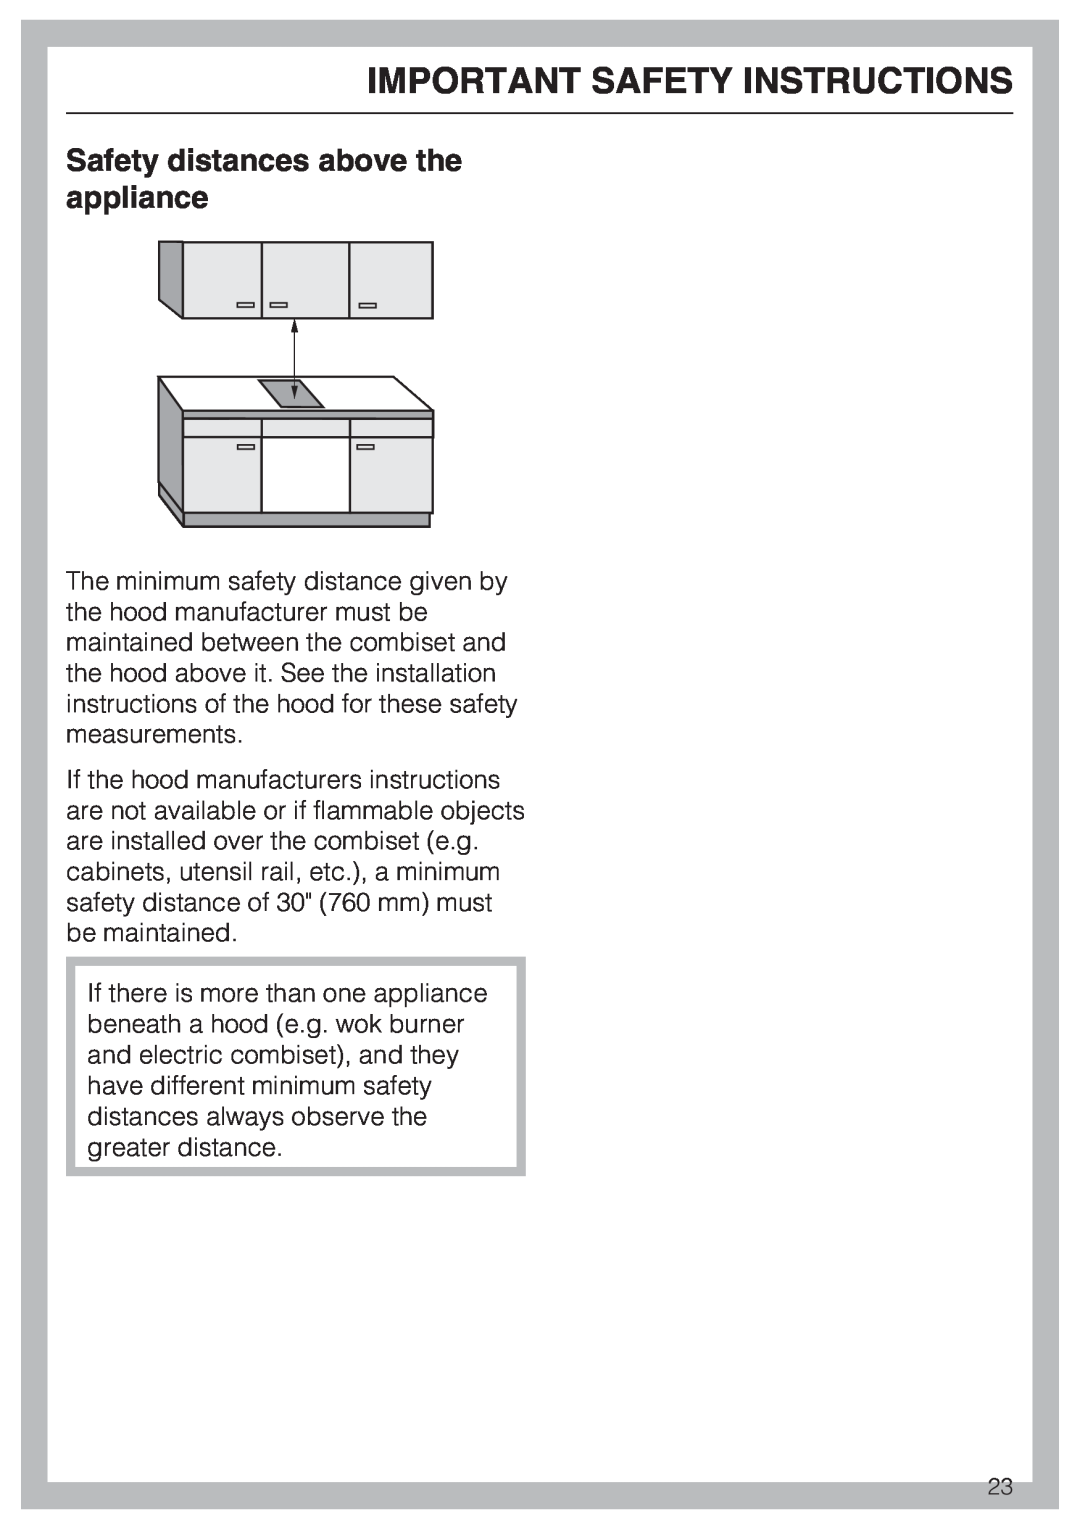 Miele CS 1028 installation instructions Safety distances above the appliance, Important Safety Instructions 